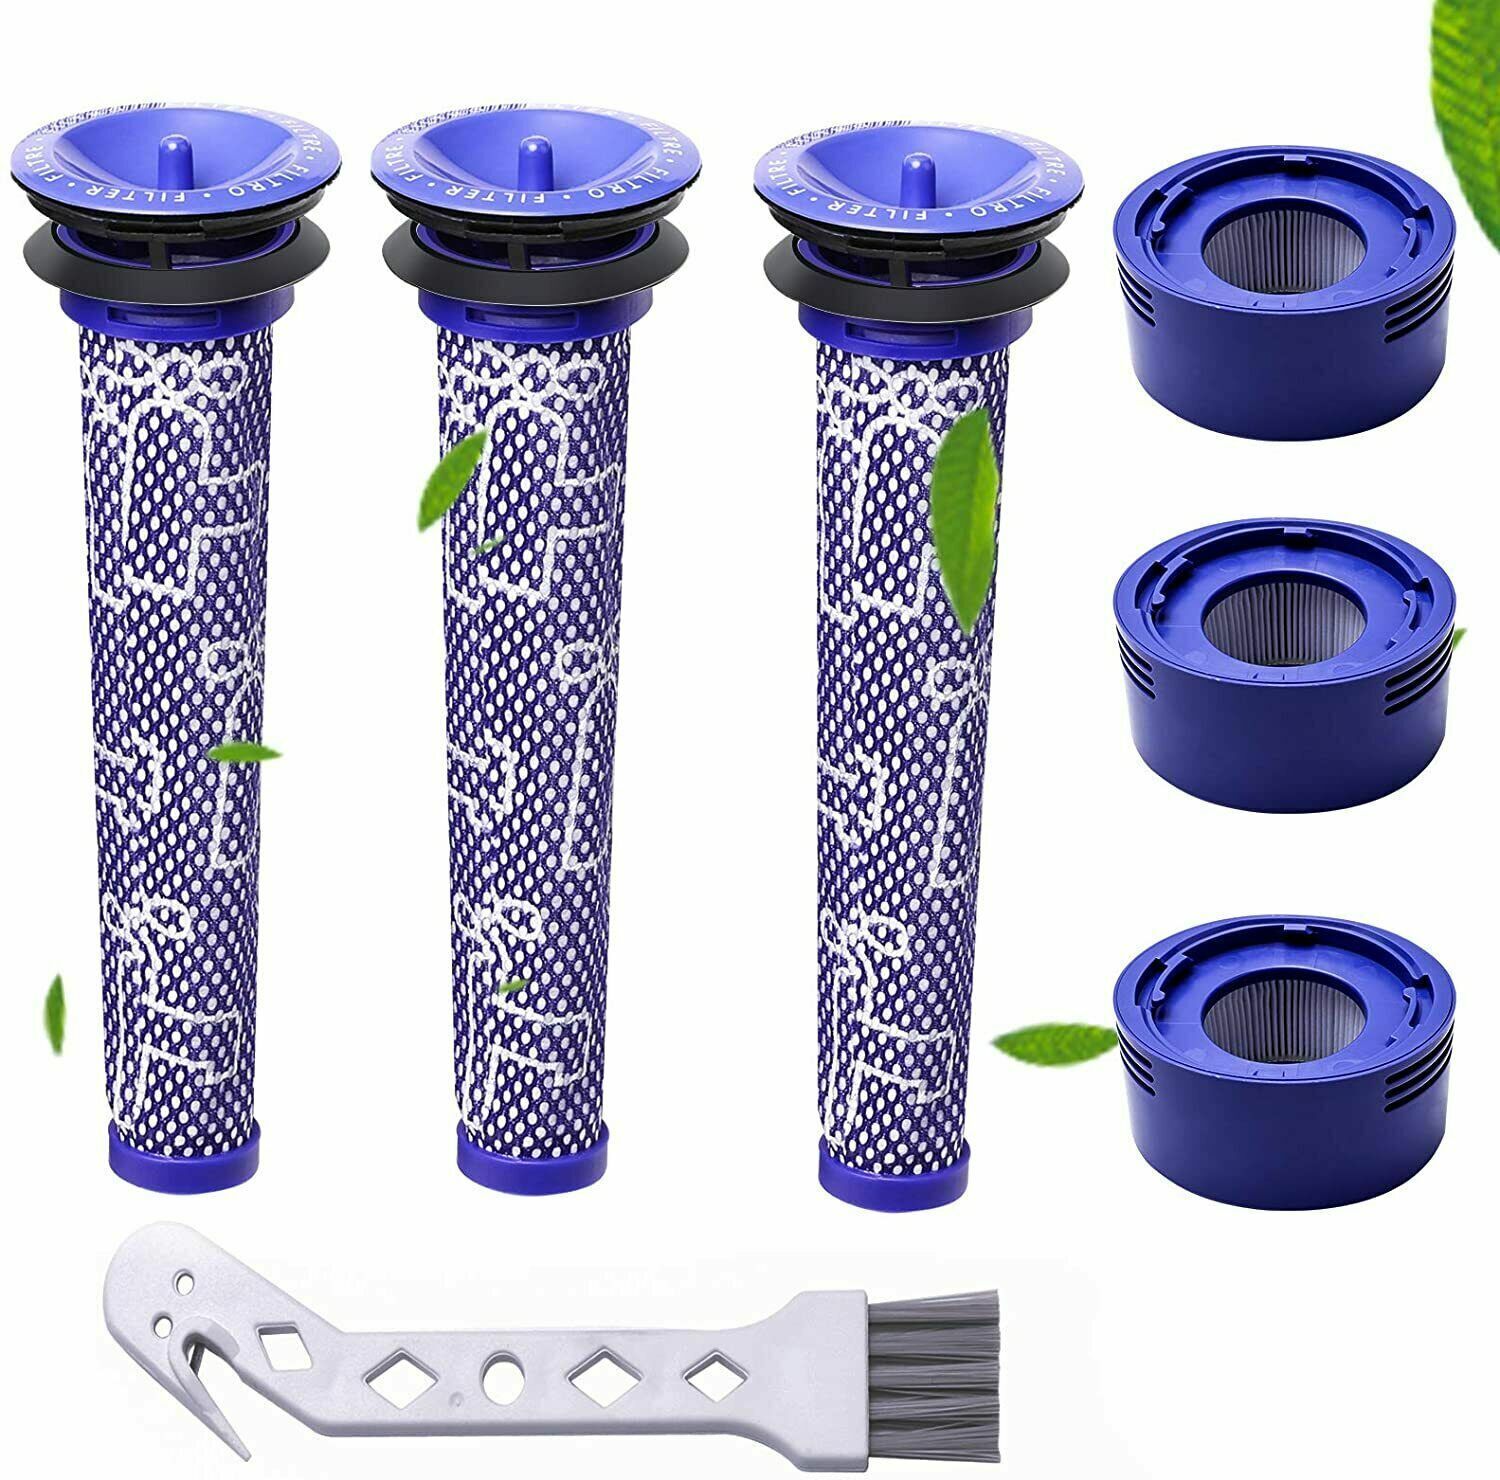 6 Pack Filter Replacement for Dyson V7 V8 Animal and V8 Absolute Cordless Vacuum Housmile - фотография #10